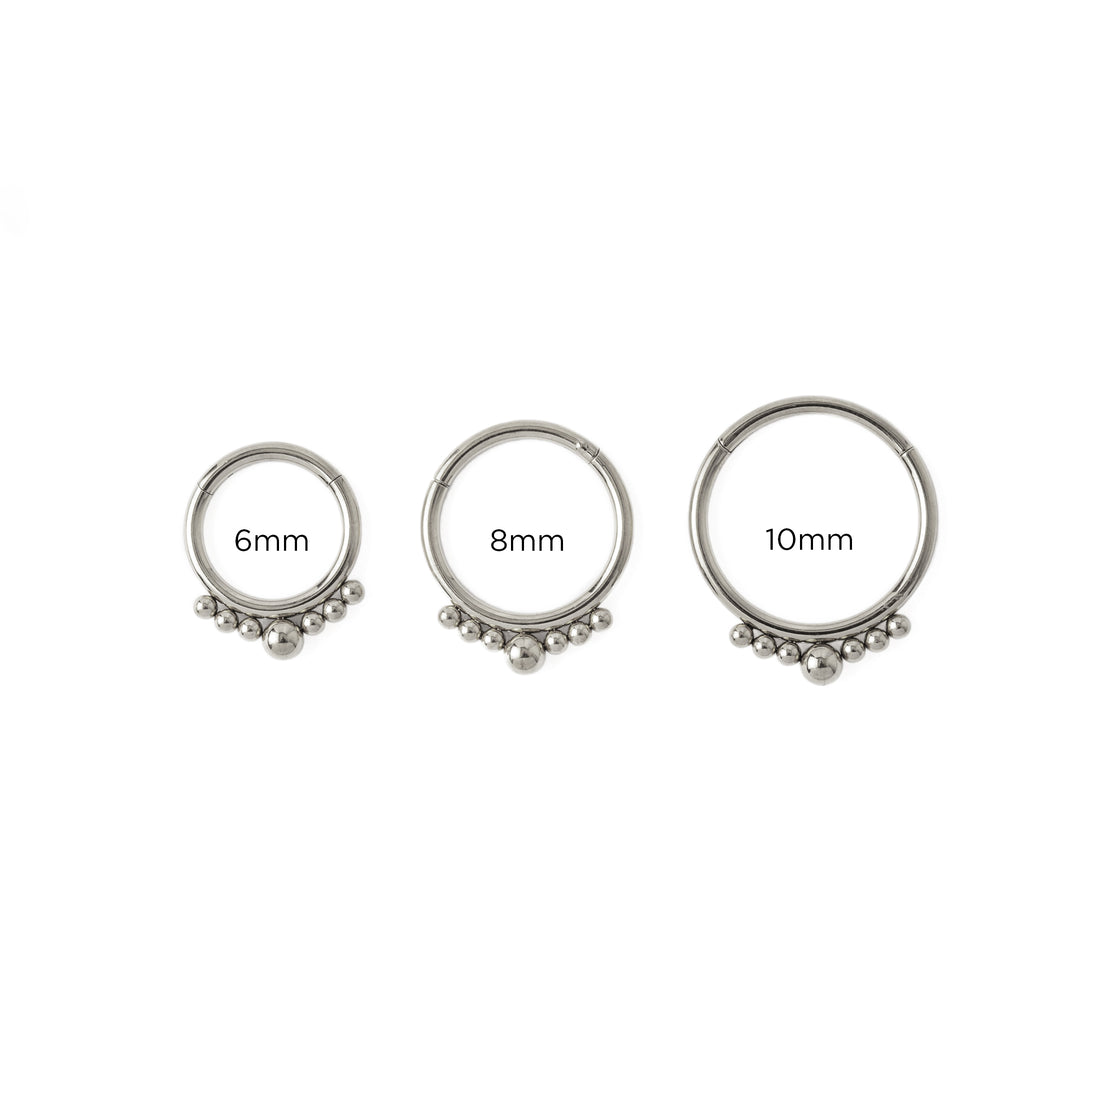 6mm, 8mm, 10mm Marjani Septum Clickers frontal view